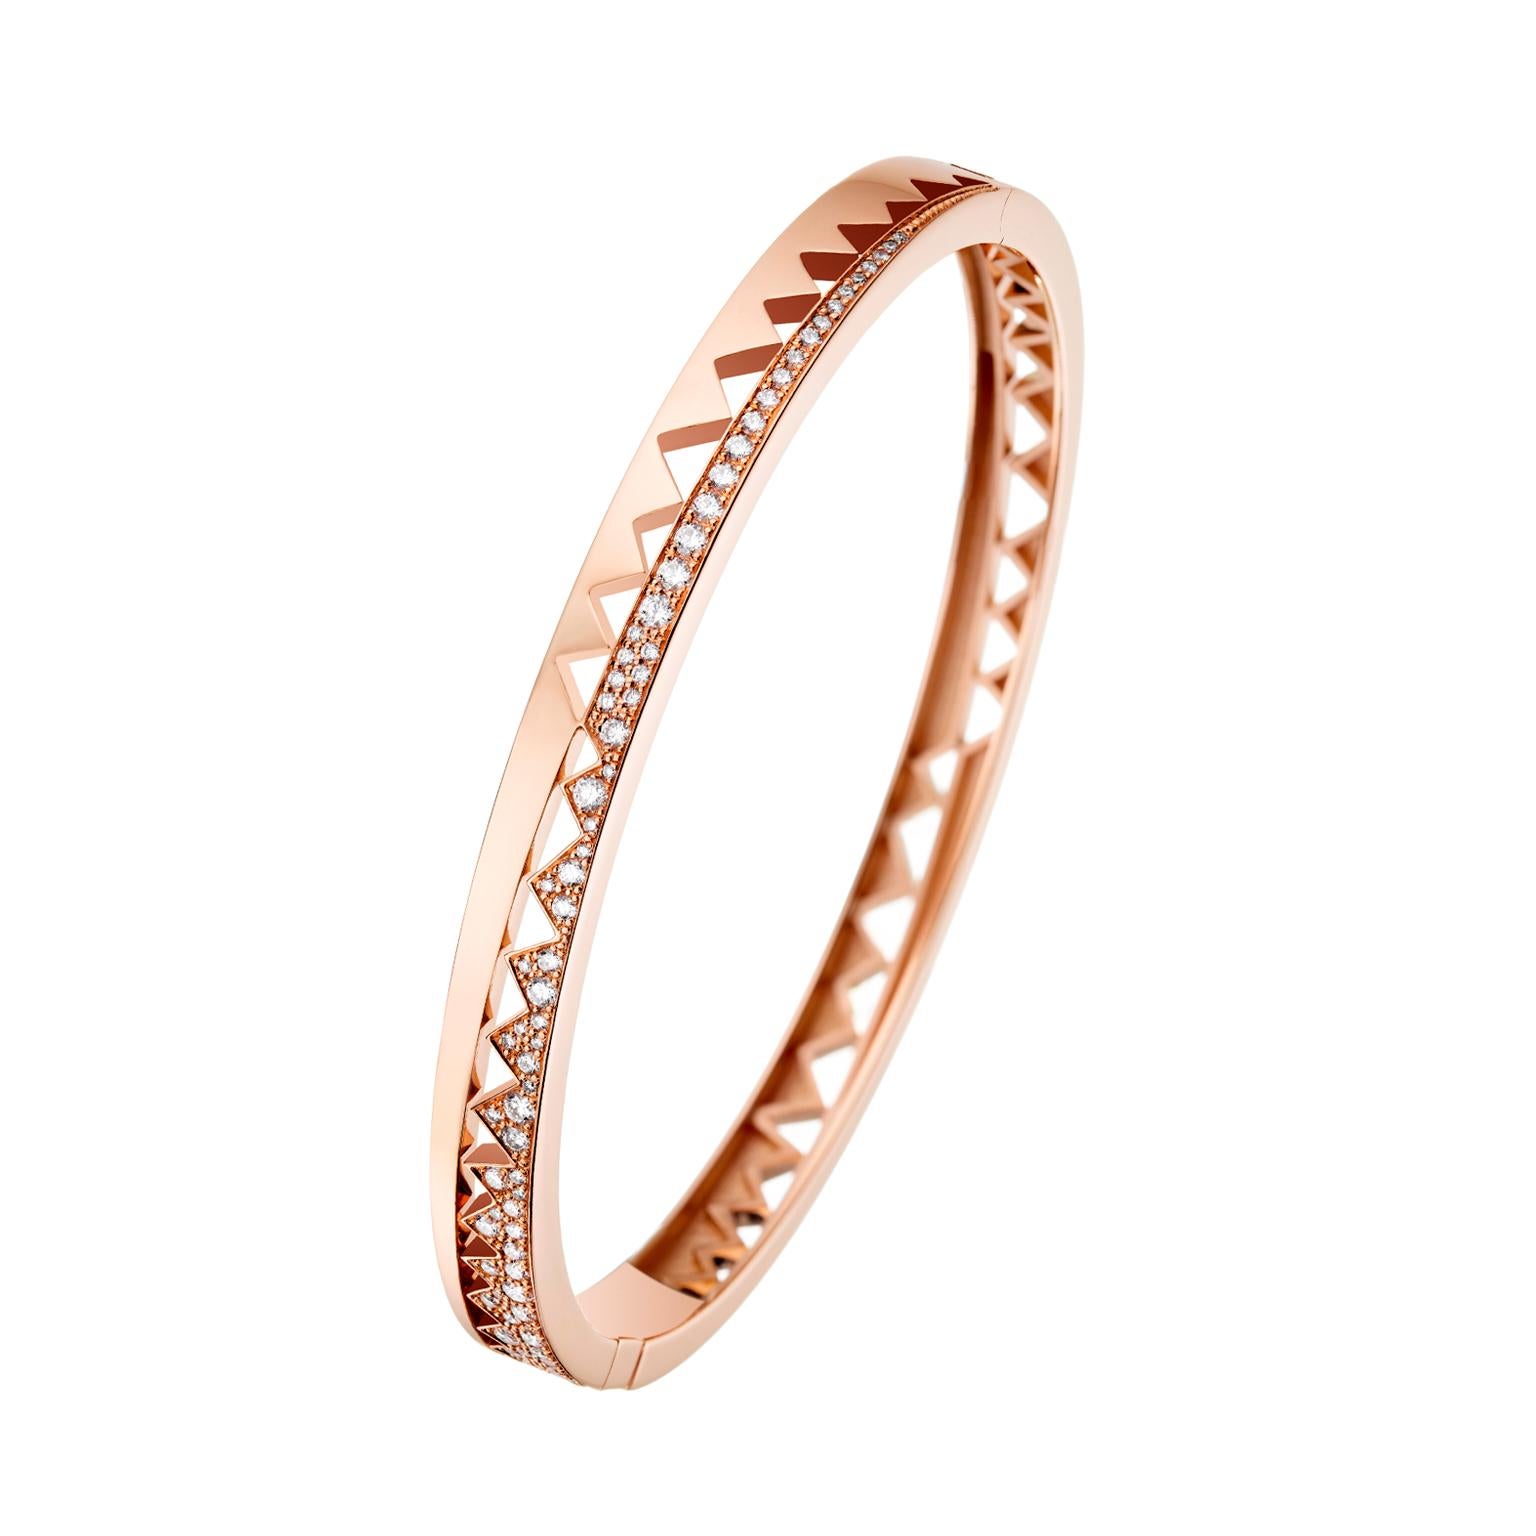 18K rose gold AKILLIS Capture Me bracelet for her half-set with white diamonds. Diamonds (cts): 0,96 
The bracelet has two sides: one half-set with white diamonds and another one without diamonds, offering a sophisticated and playful look.

The new